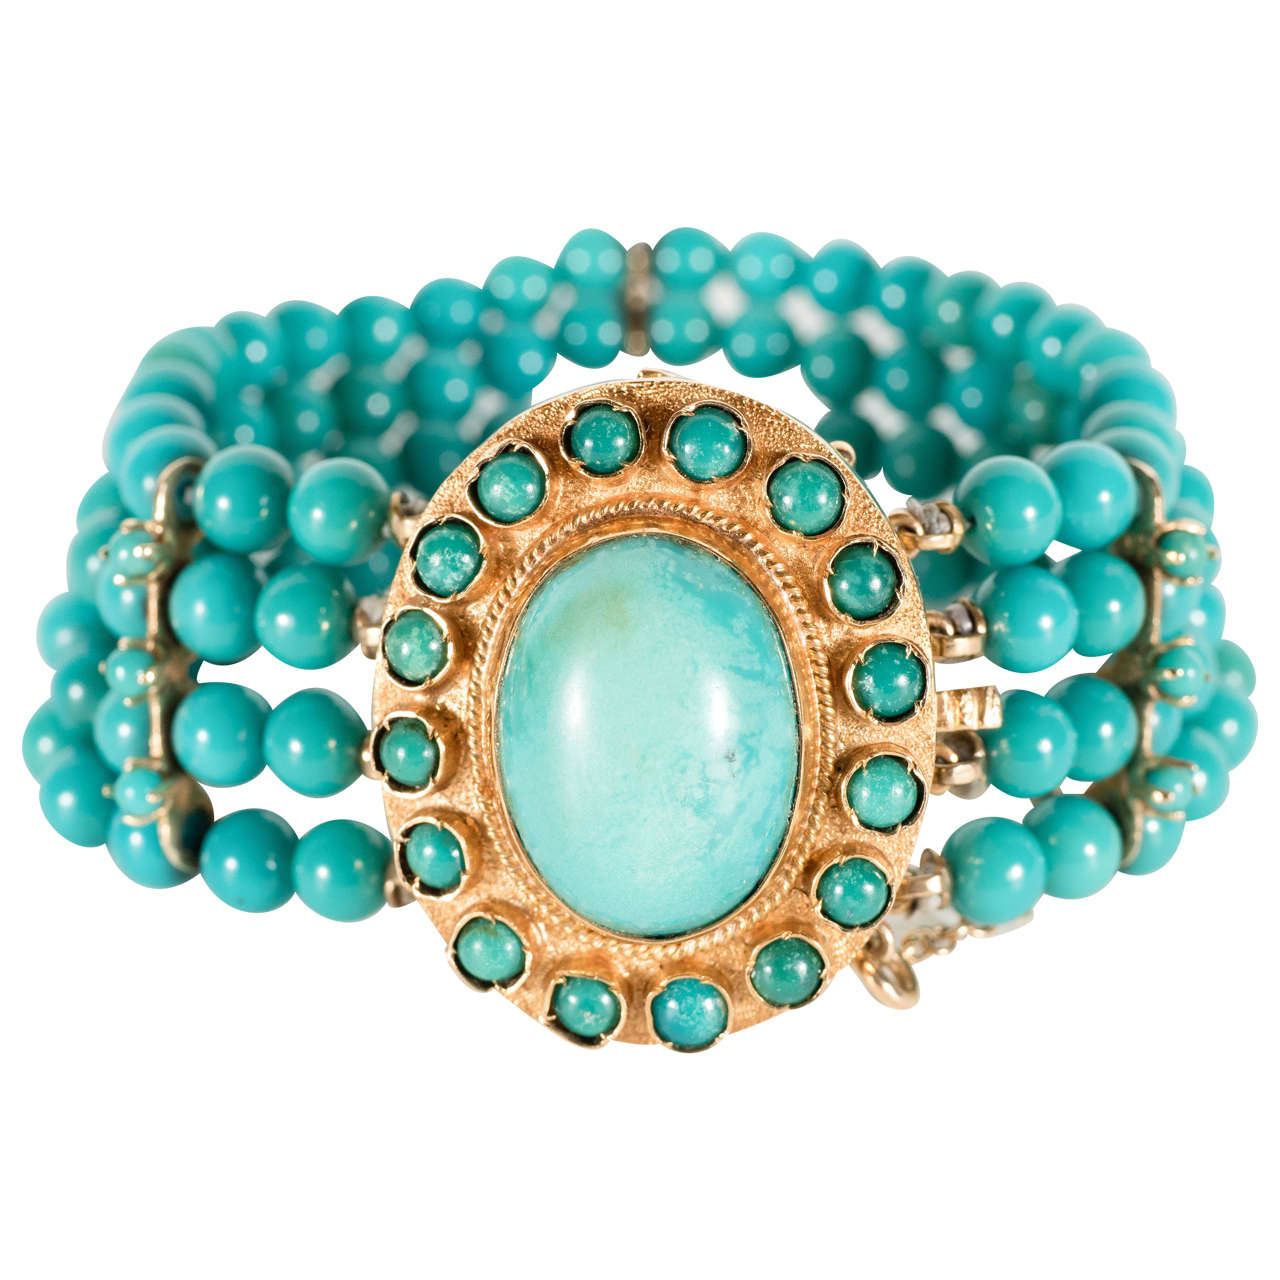 Antique  Four Strand Turquoise and Gold Bracelet